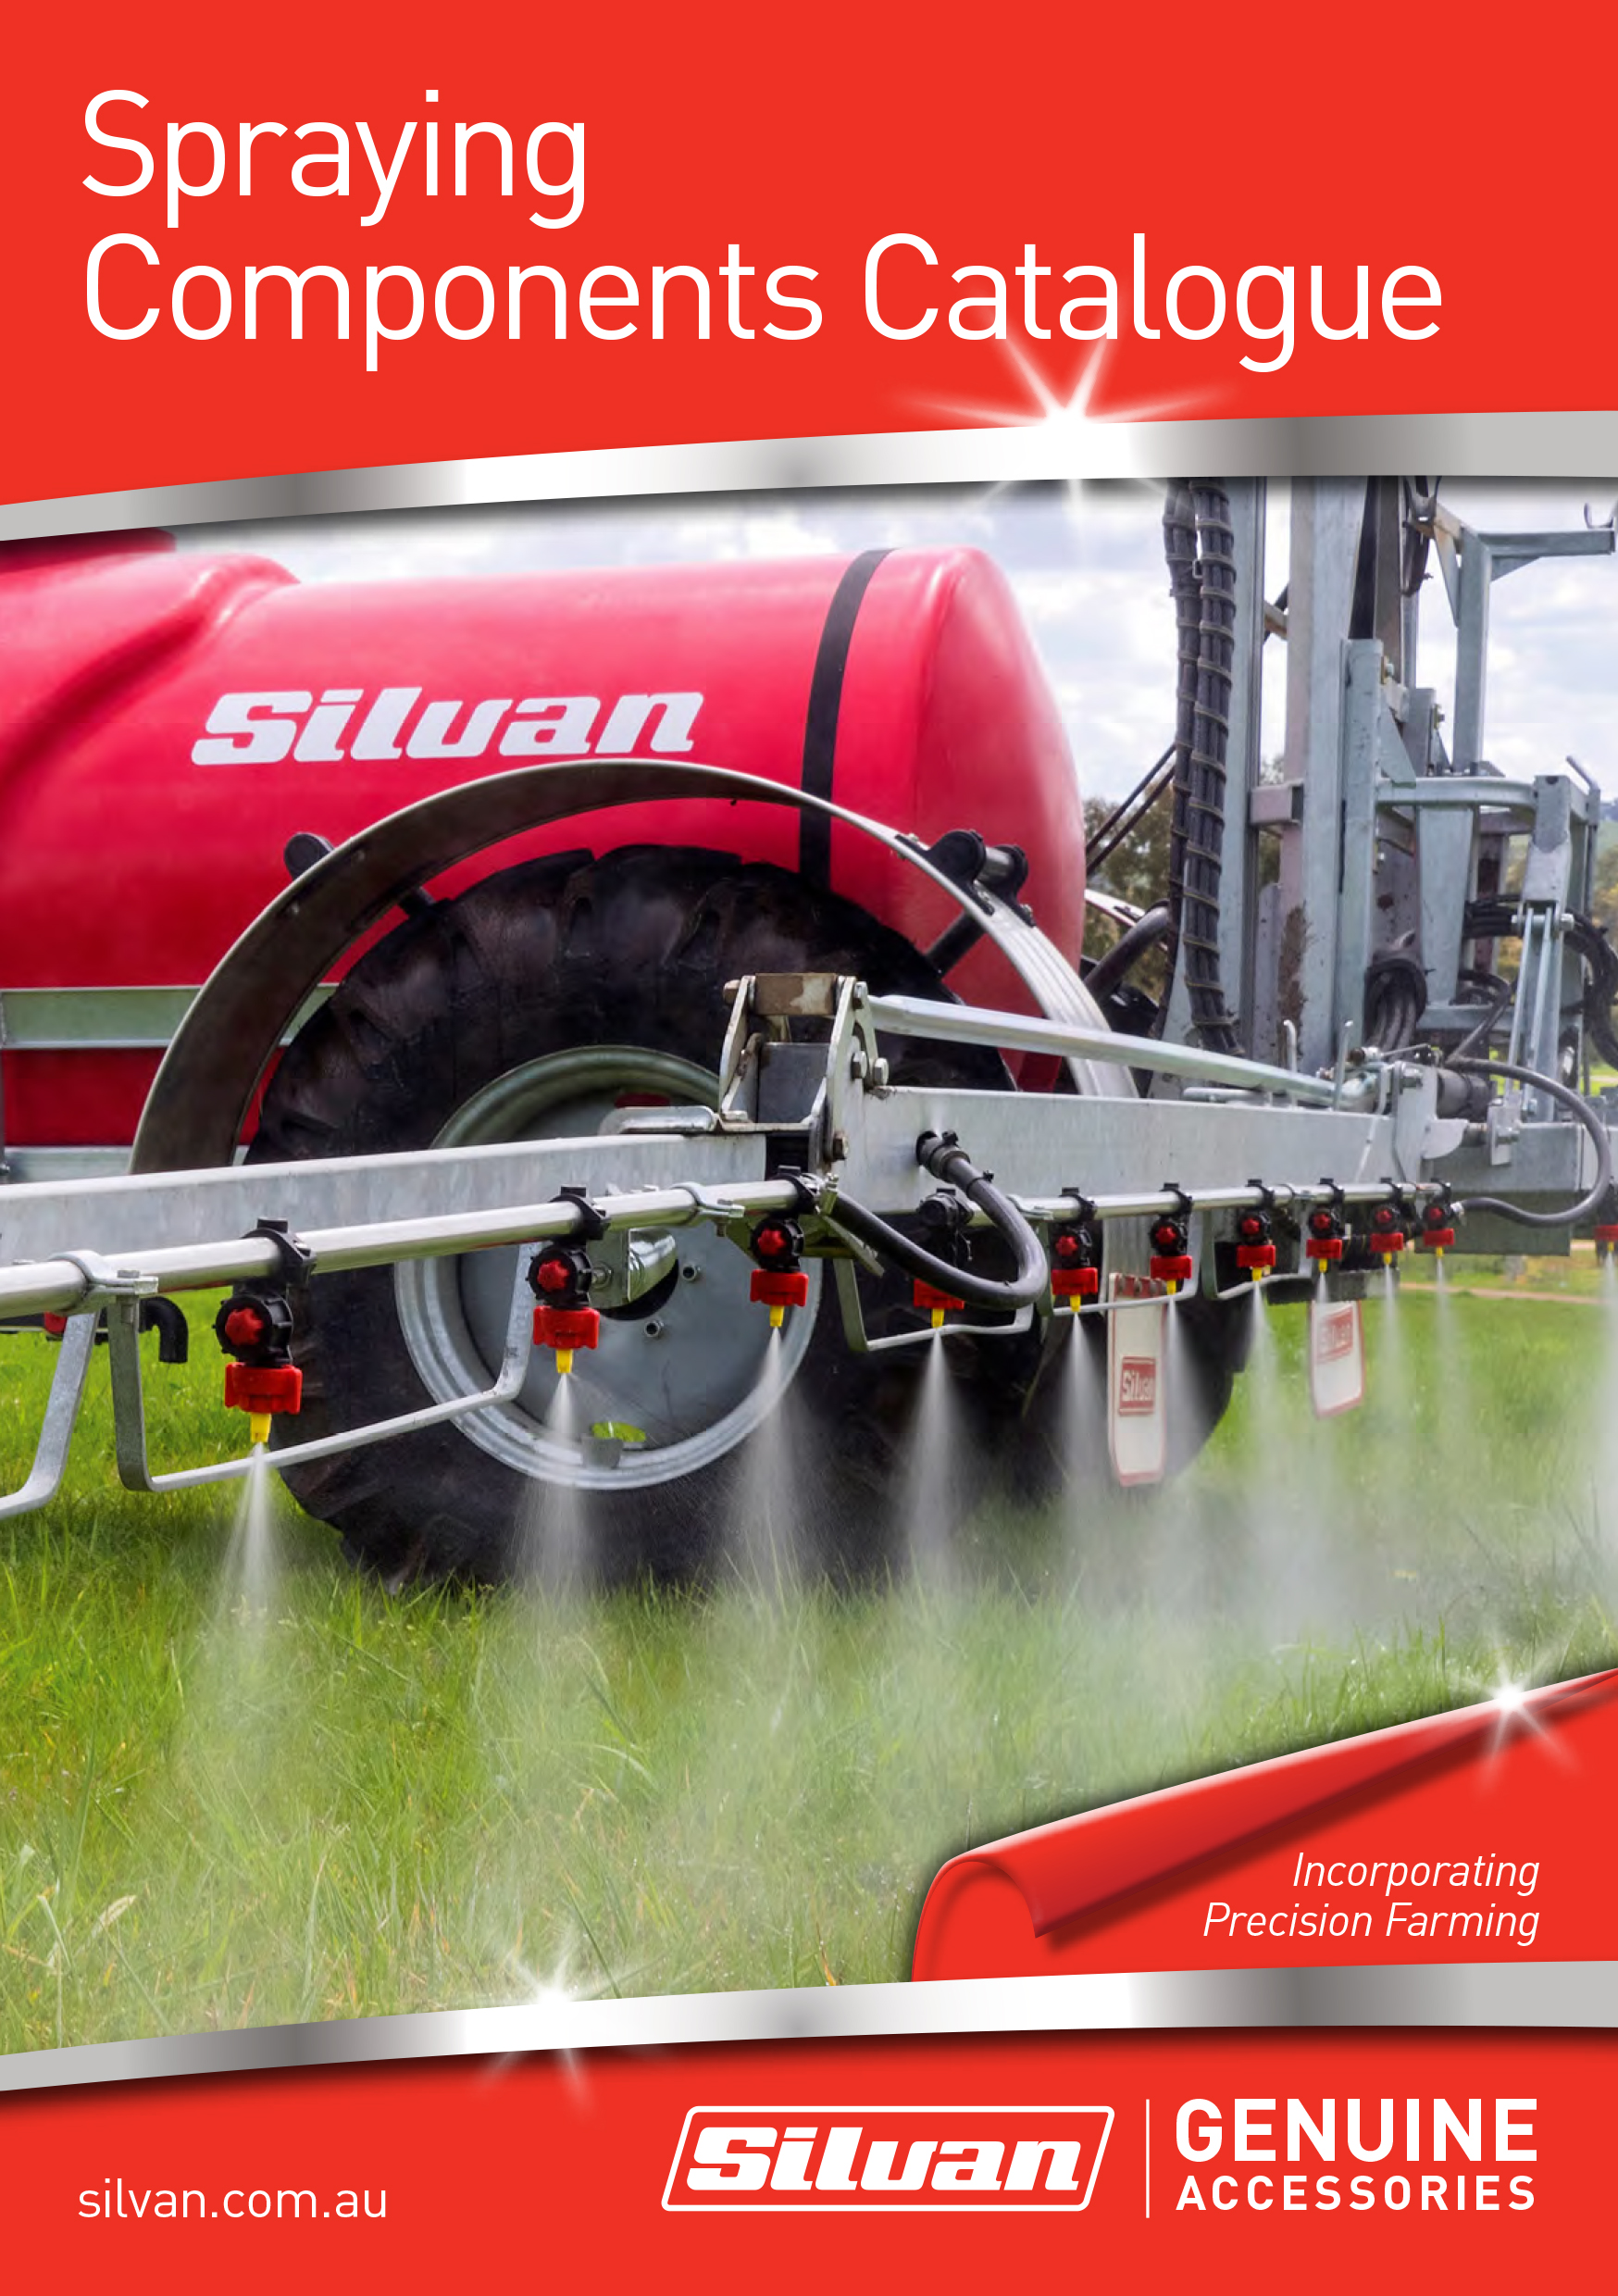 Spraying Components Catalogue 2020